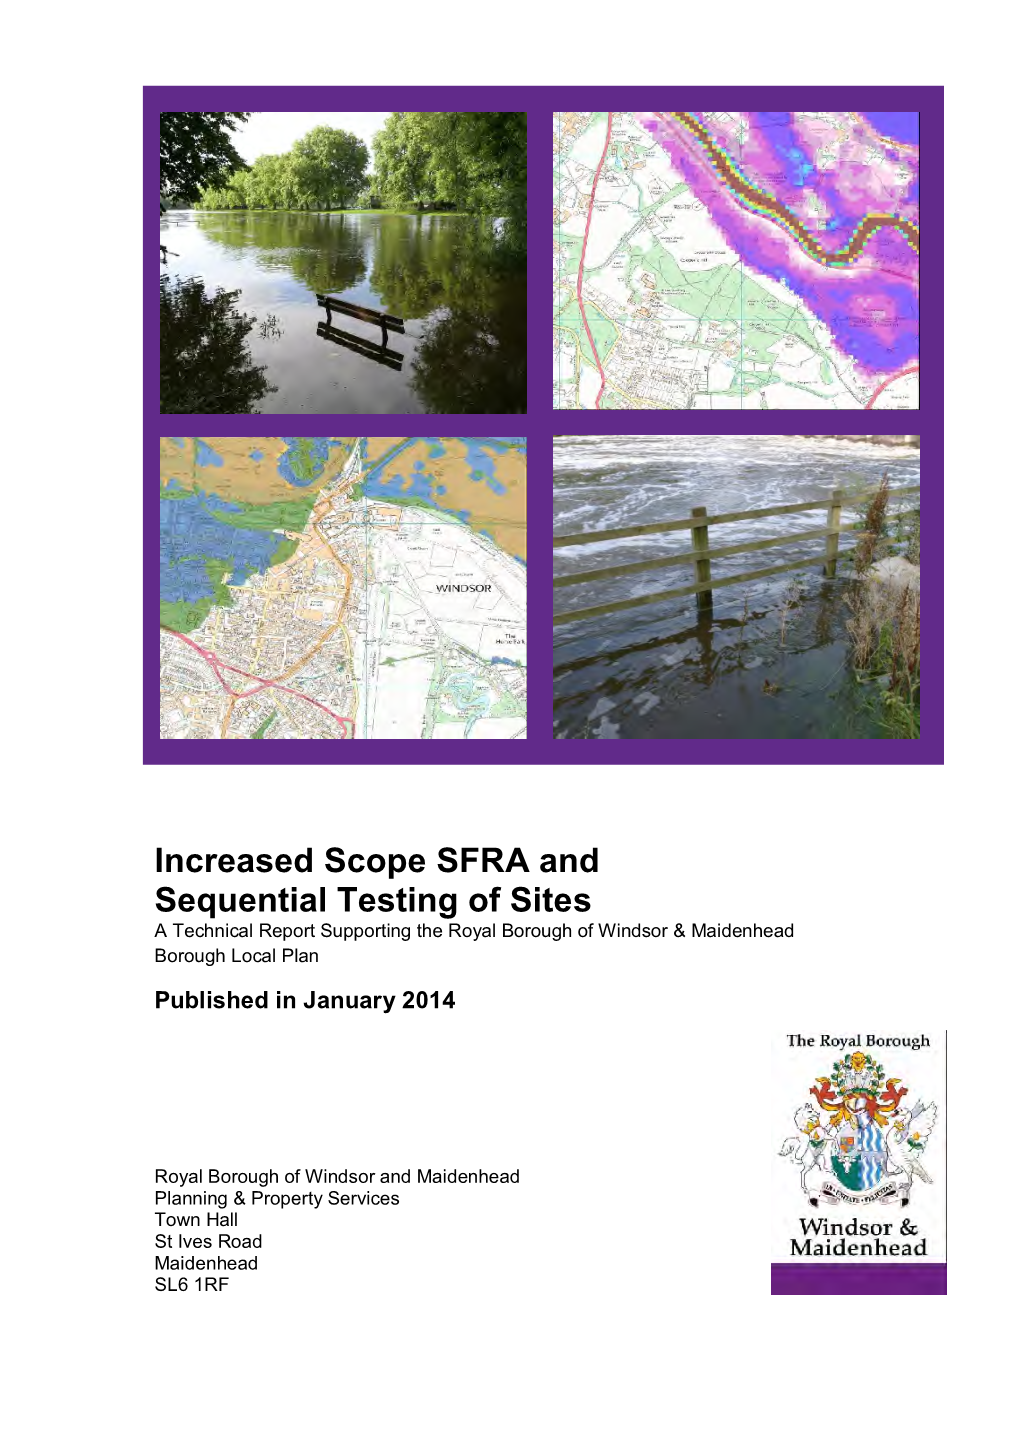 Increased Scope SFRA and Sequential Testing of Sites a Technical Report Supporting the Royal Borough of Windsor & Maidenhead Borough Local Plan